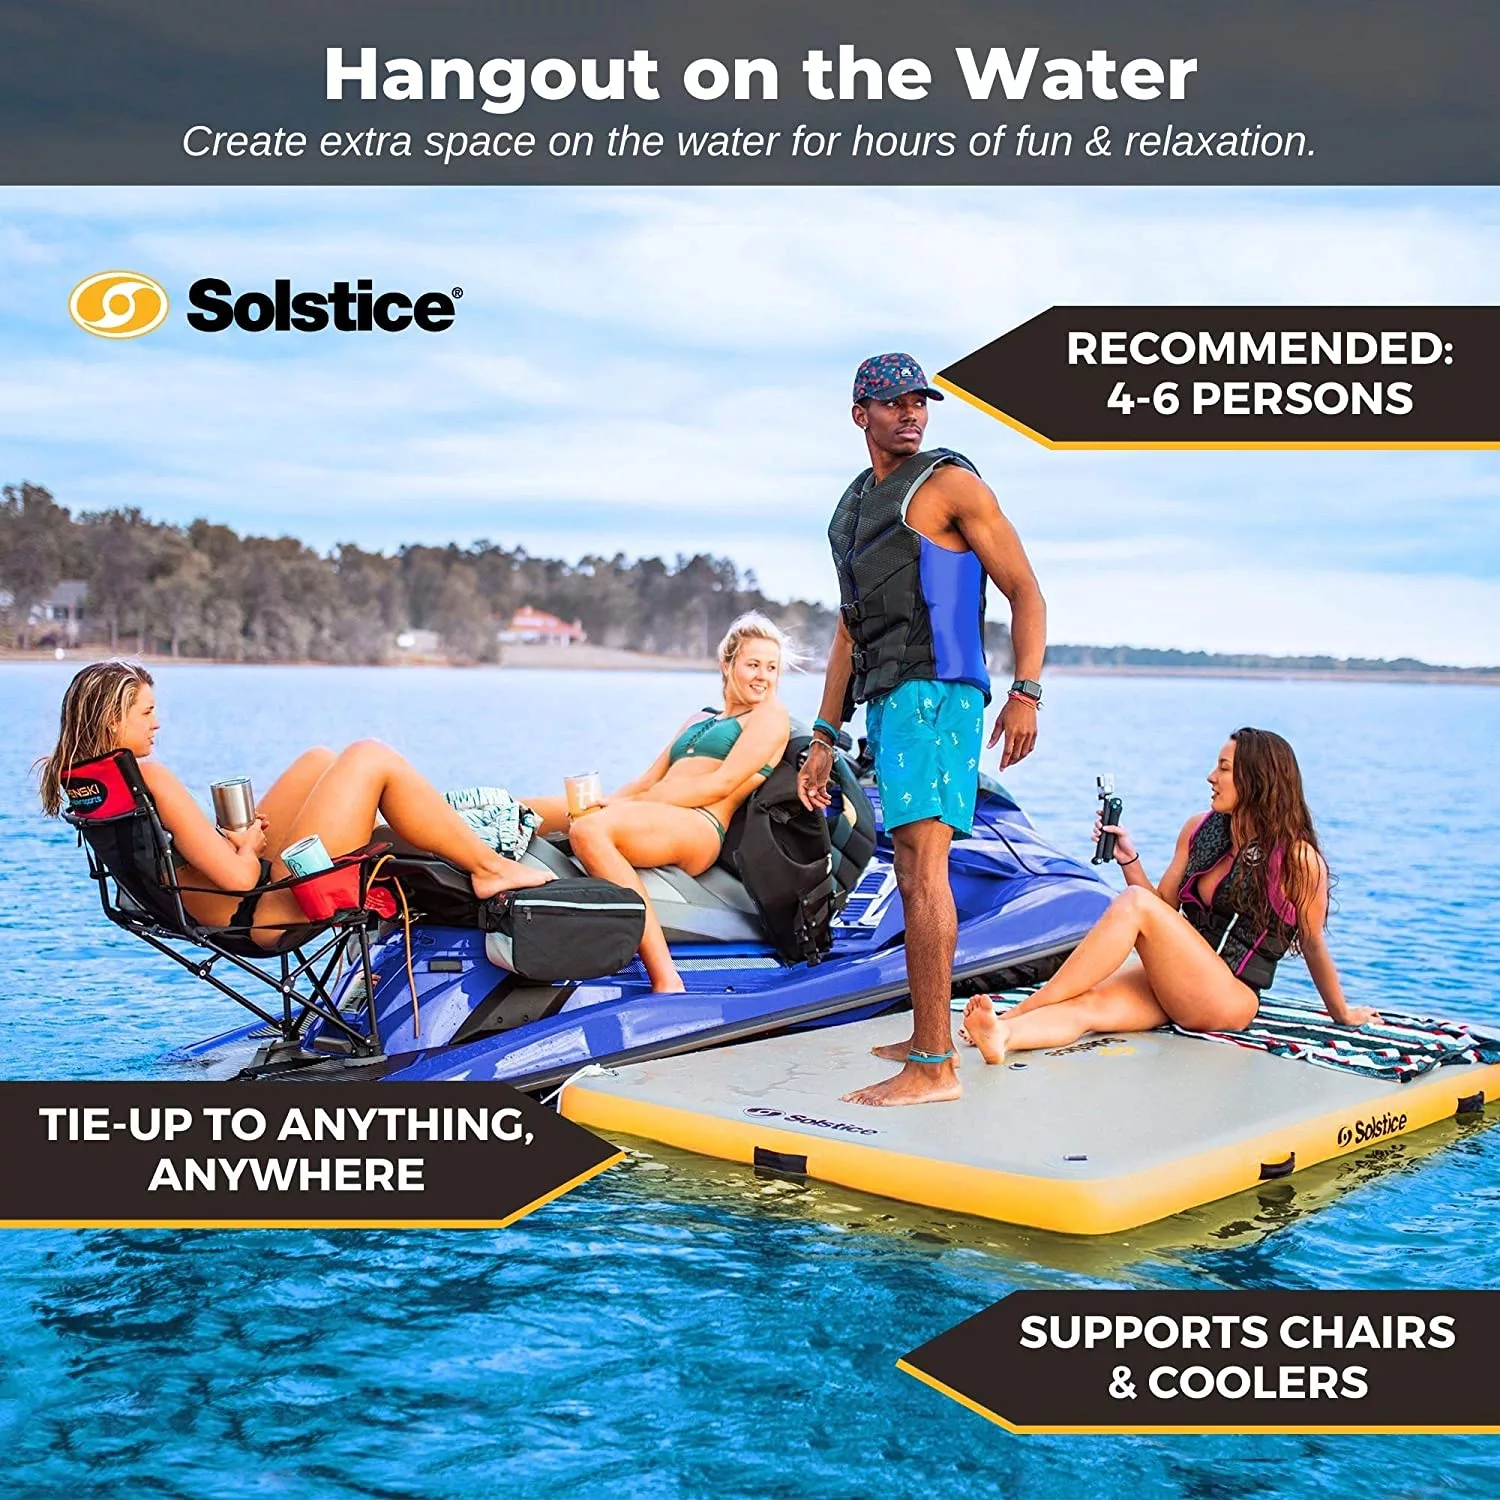 Solstice Inflatable Floating Dock Hangout on the water